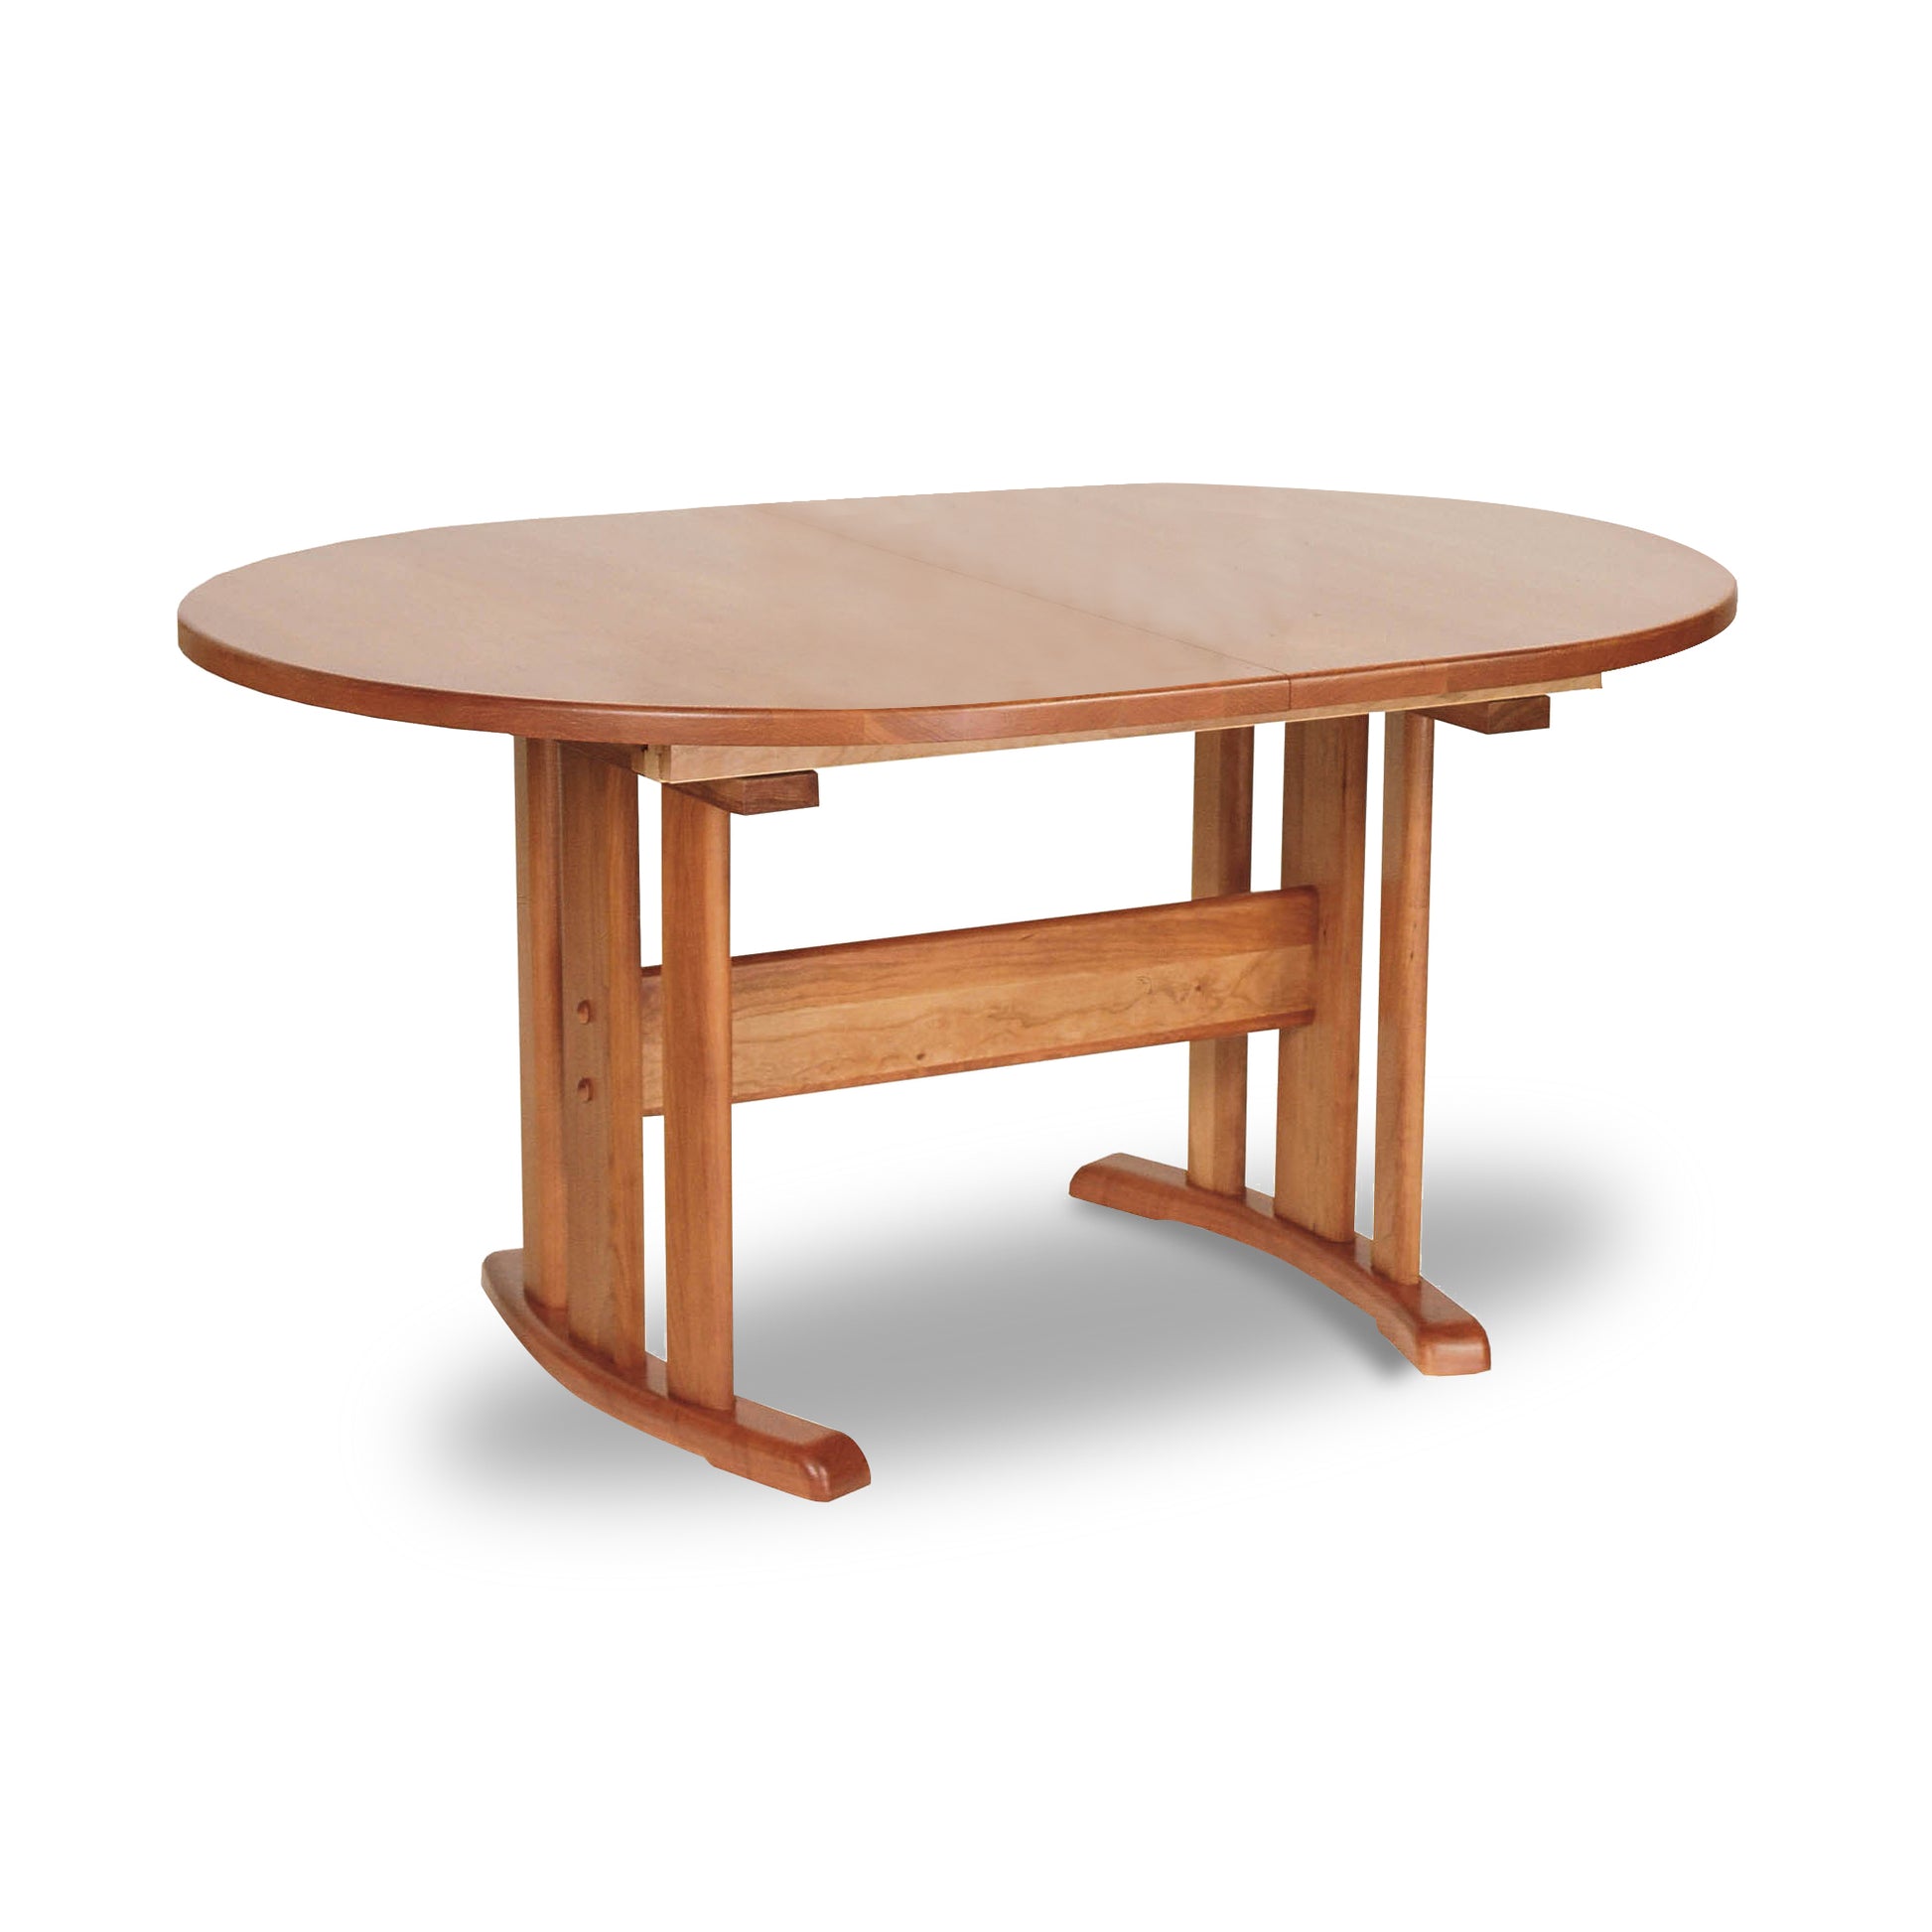 A Lyndon Furniture Oval Trestle Extension Table #1 with a wooden top and legs.